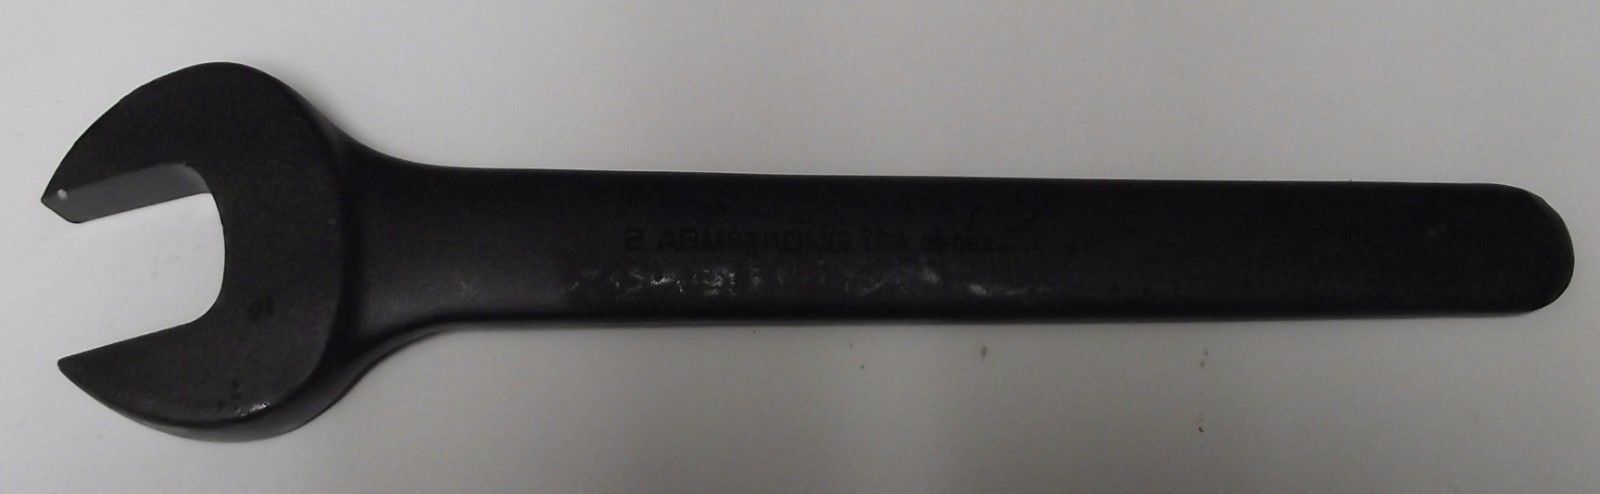 Armstrong 31-064 2" Black Oxide Open End Single Head Black Oxide Wrench USA